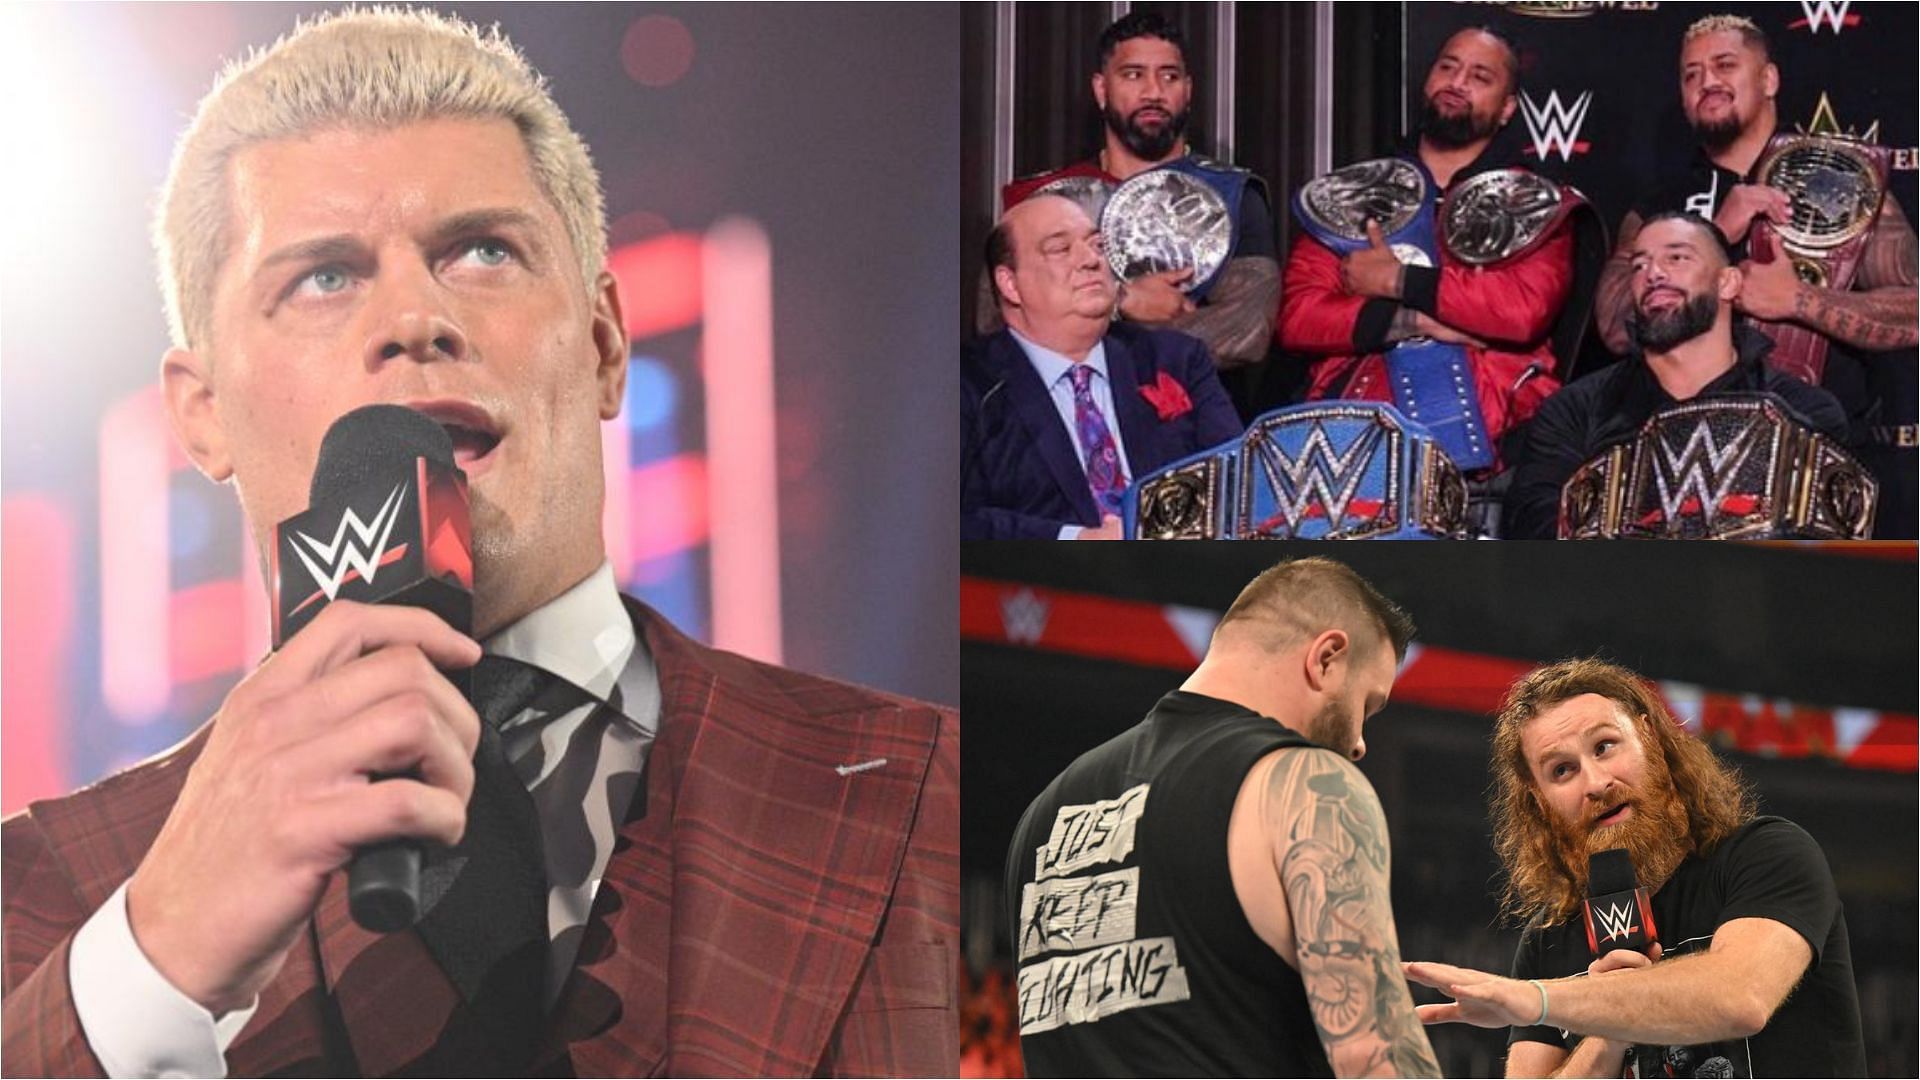 5 promising long-term WWE storylines that could pay off soon